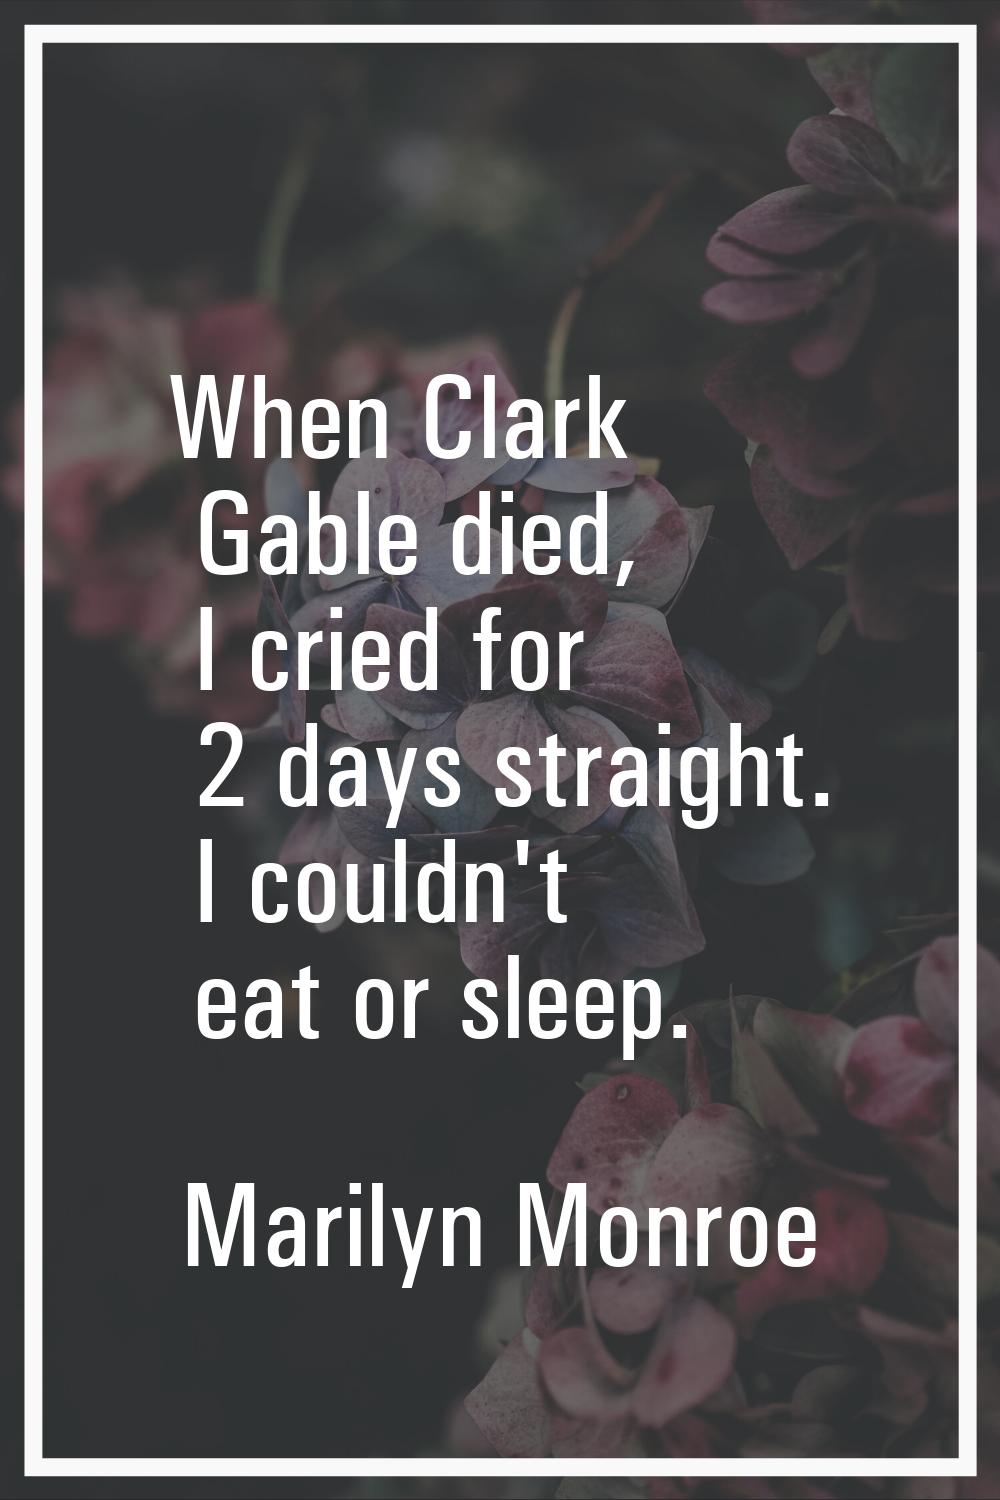 When Clark Gable died, I cried for 2 days straight. I couldn't eat or sleep.